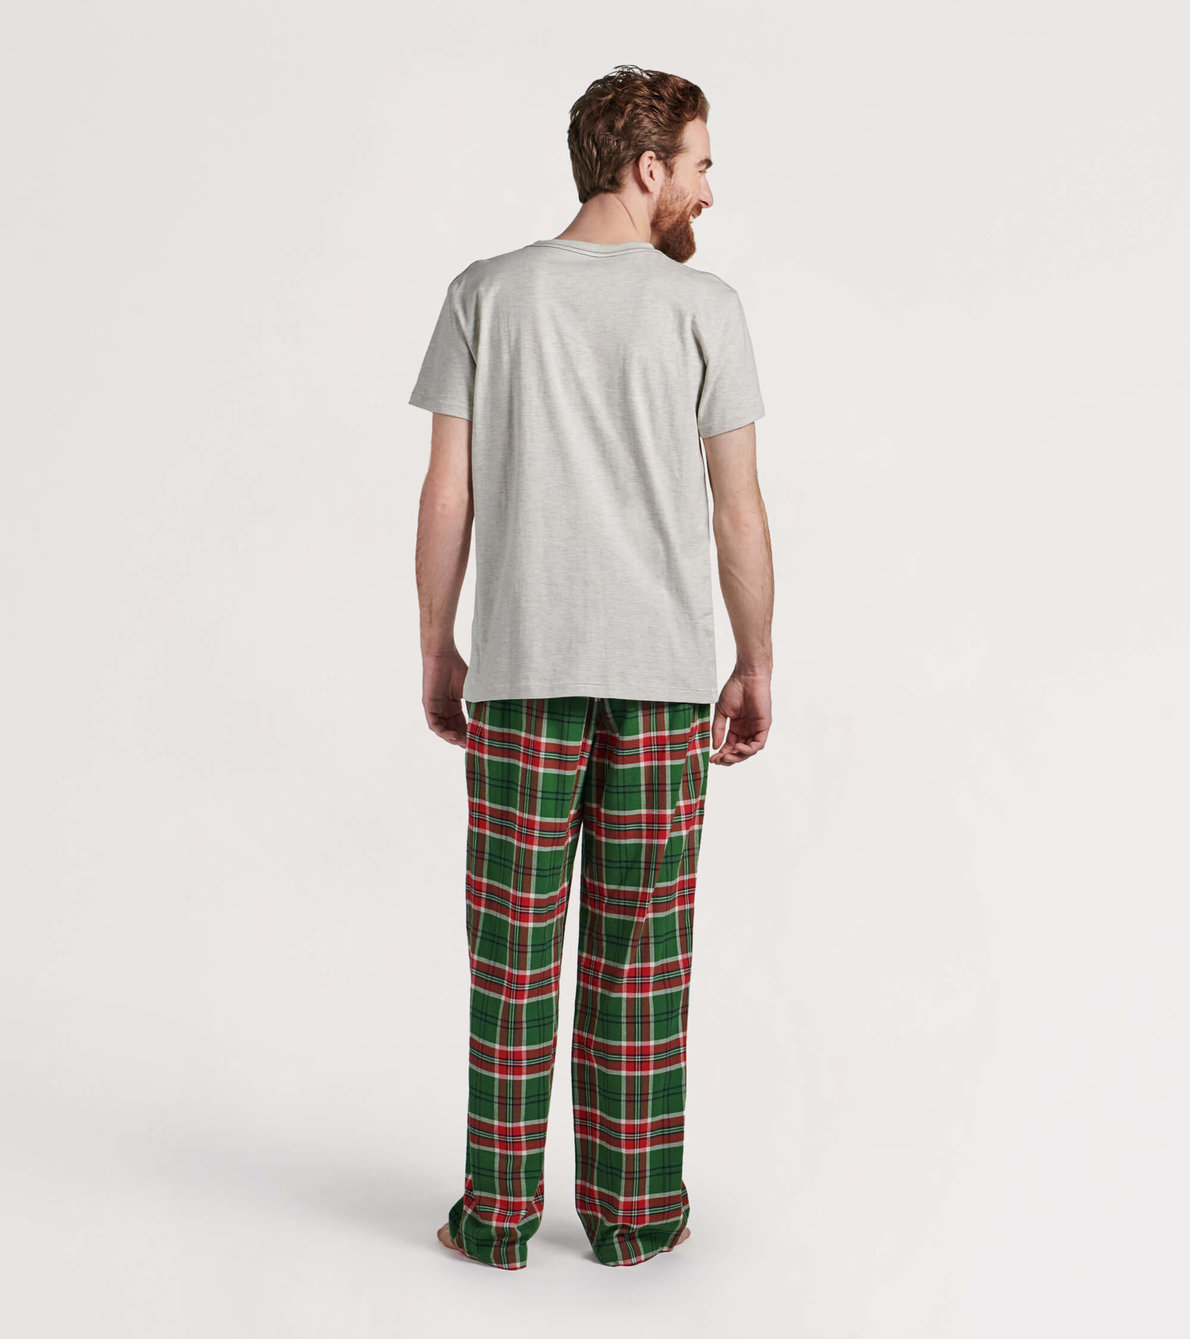 View larger image of Men's Country Christmas Plaid Flannel Pajama Pants